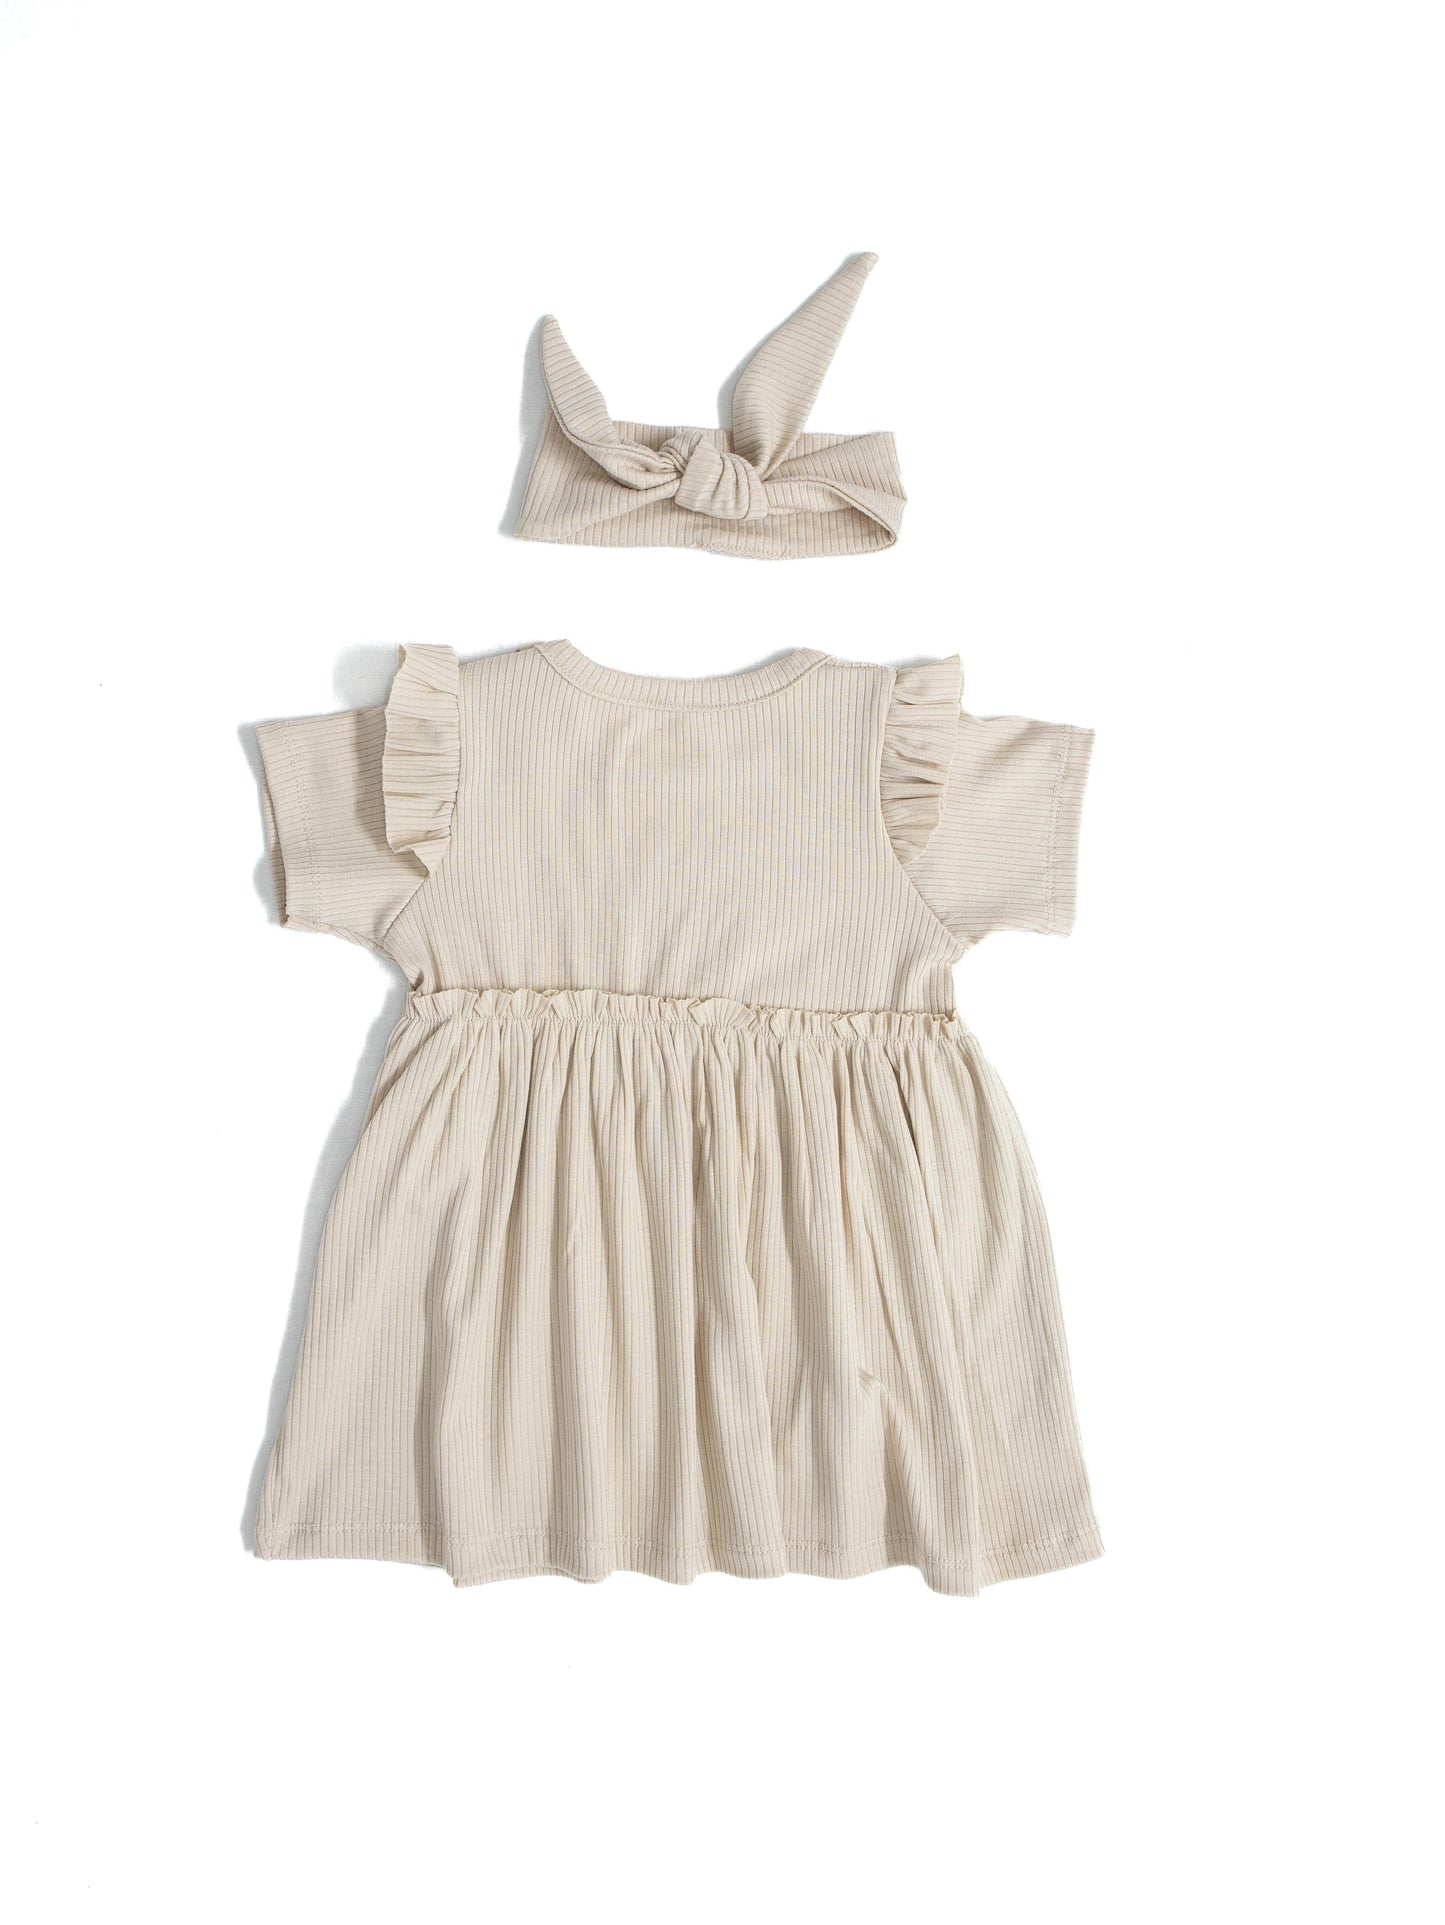 Baby Summer Dress 100% Lyocell Cotton Fabric Soft And Sweatproof.